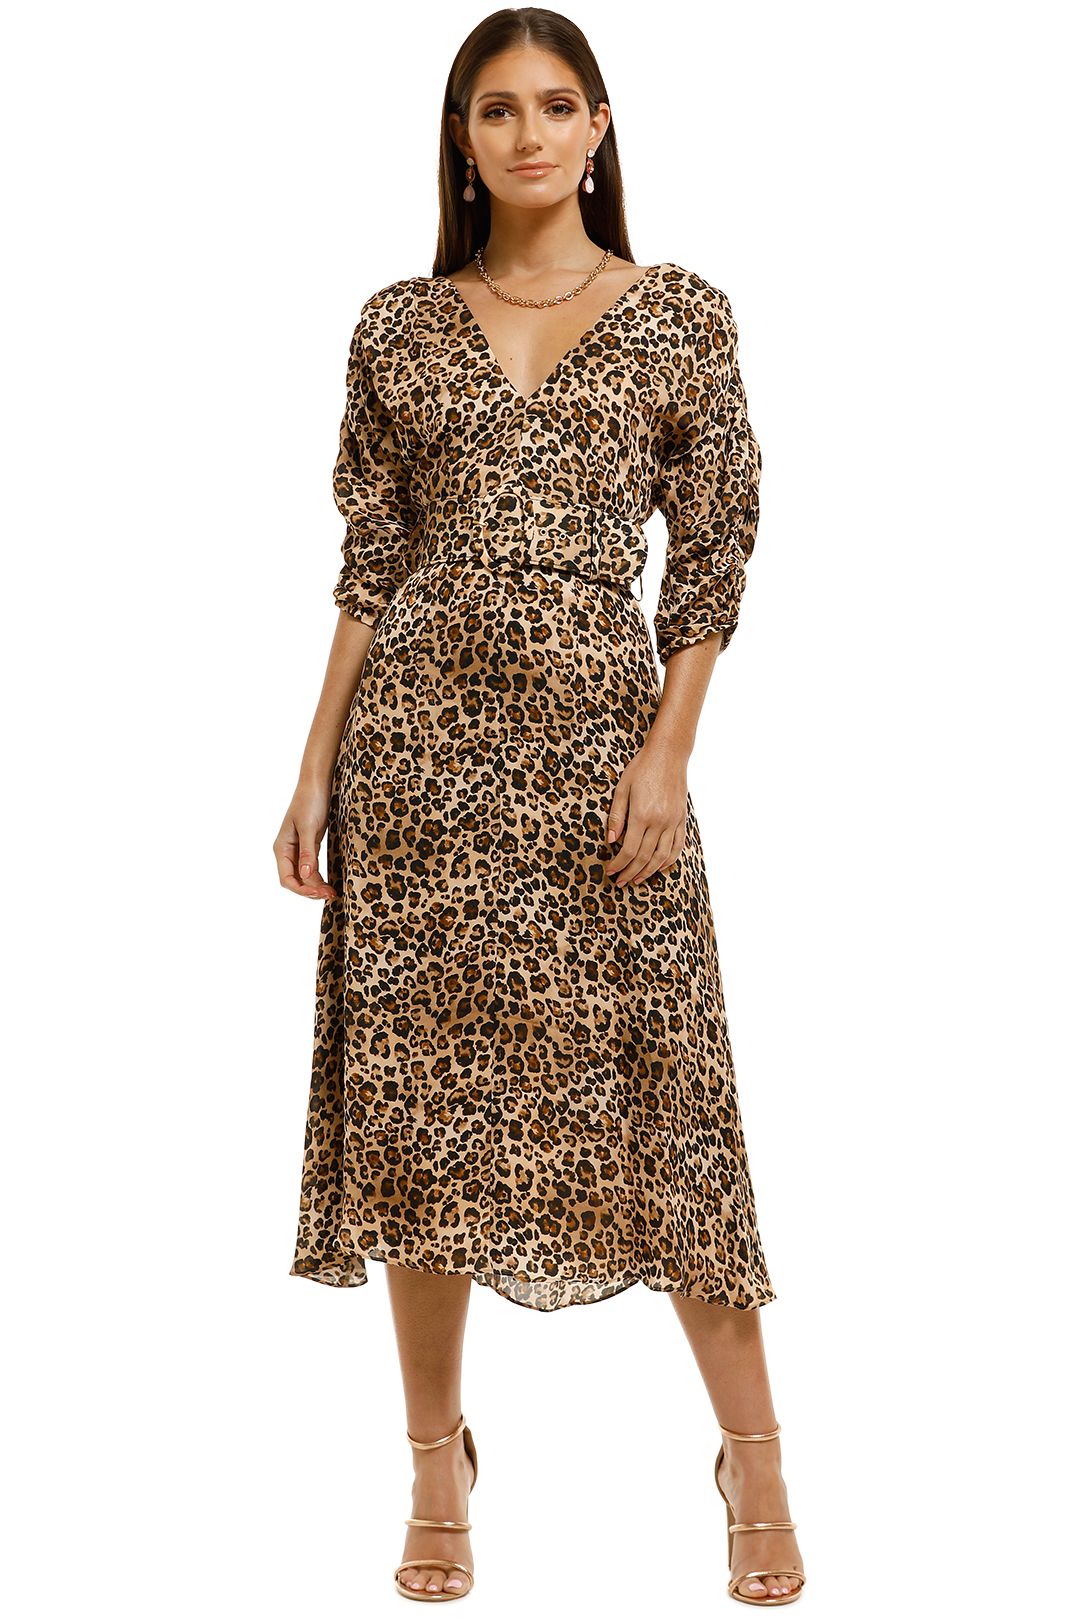 Nicholas-The-Label-Gathered-Sleeve-Dress-Leopard-Front